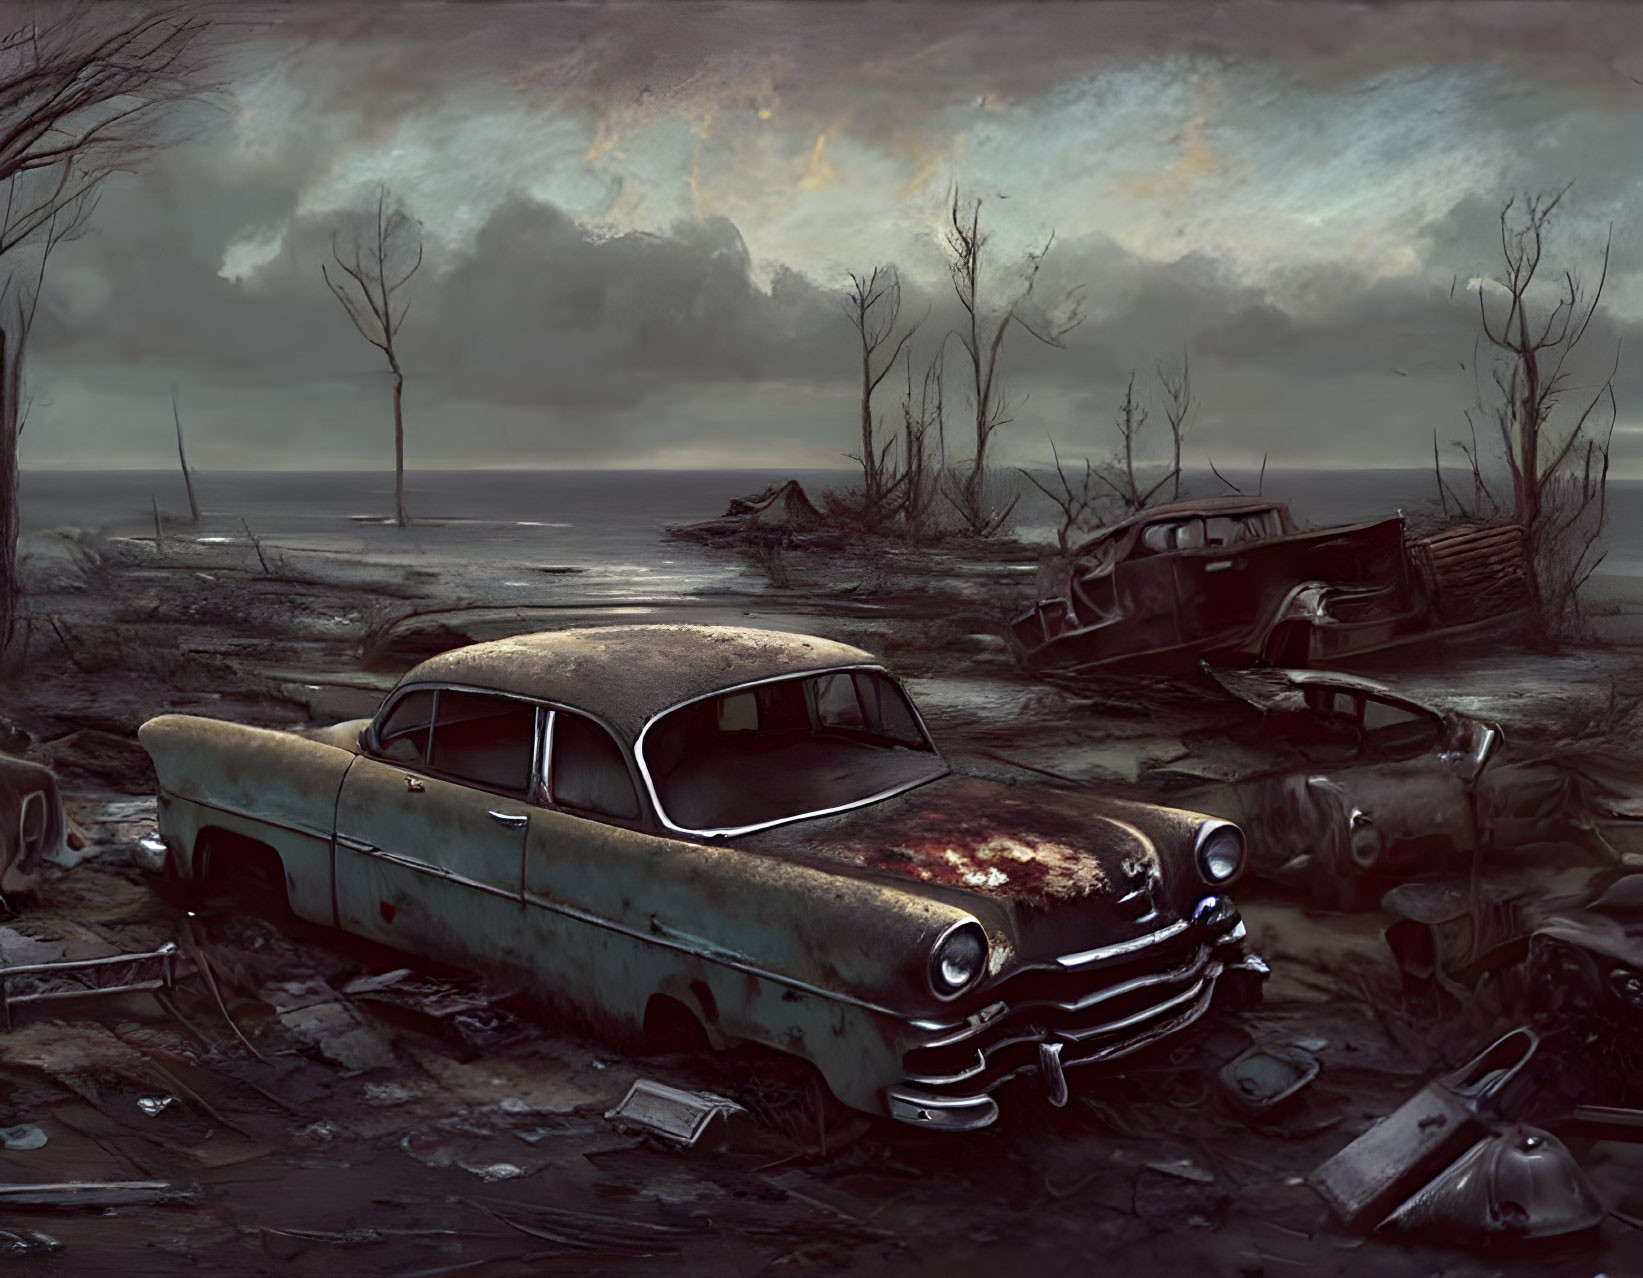 Dystopian landscape with rusted cars and desolate trees under brooding sky